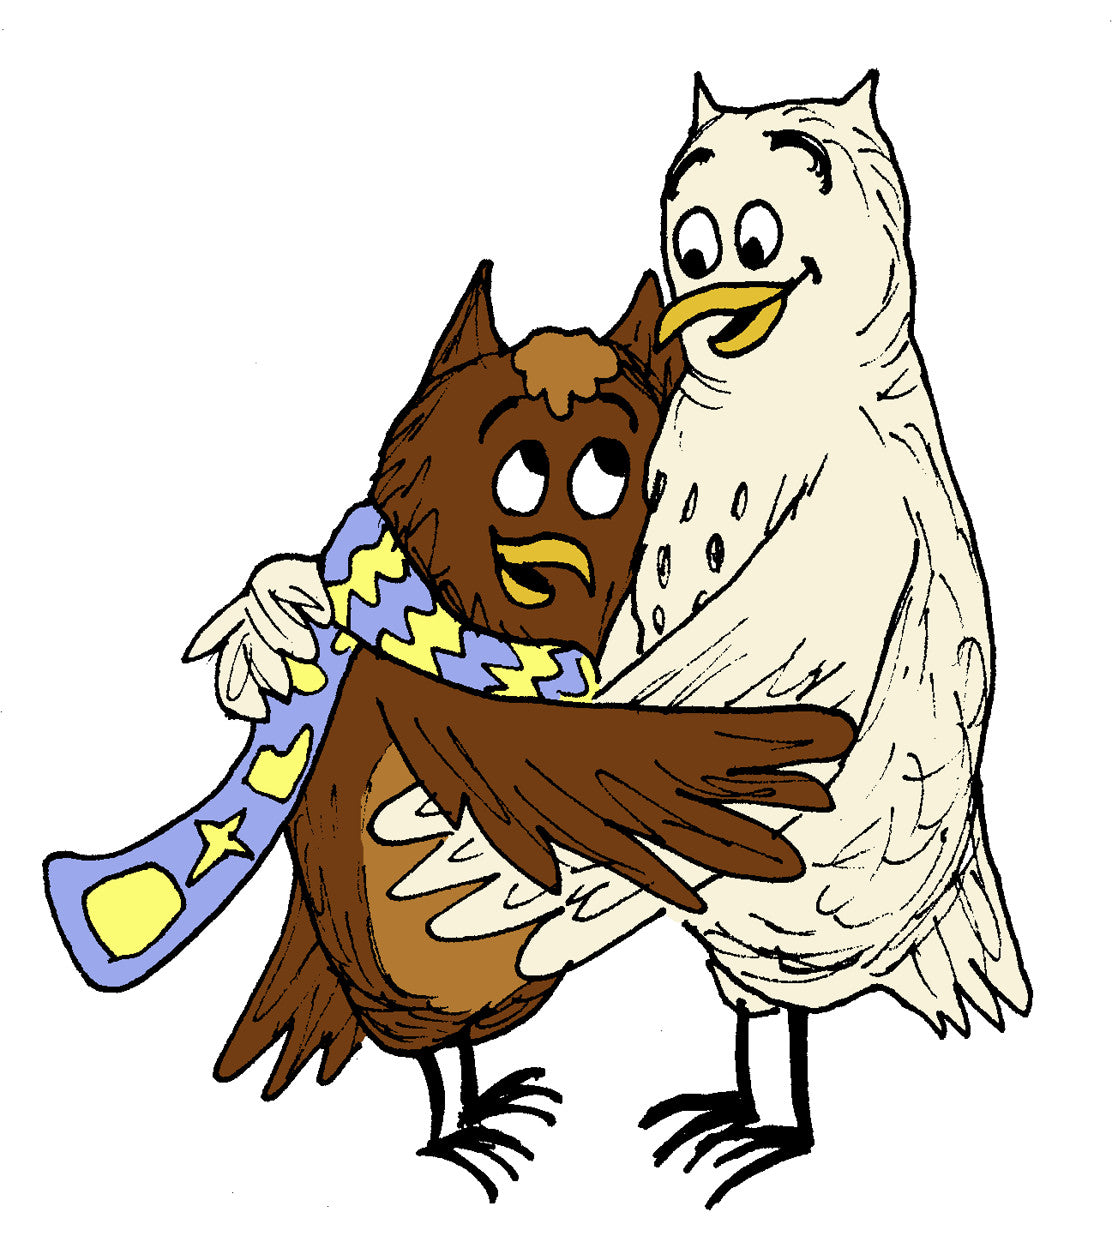 Owls hugging, Toasty and Snowy from children's book by artist author illustrator Dorothy Tully